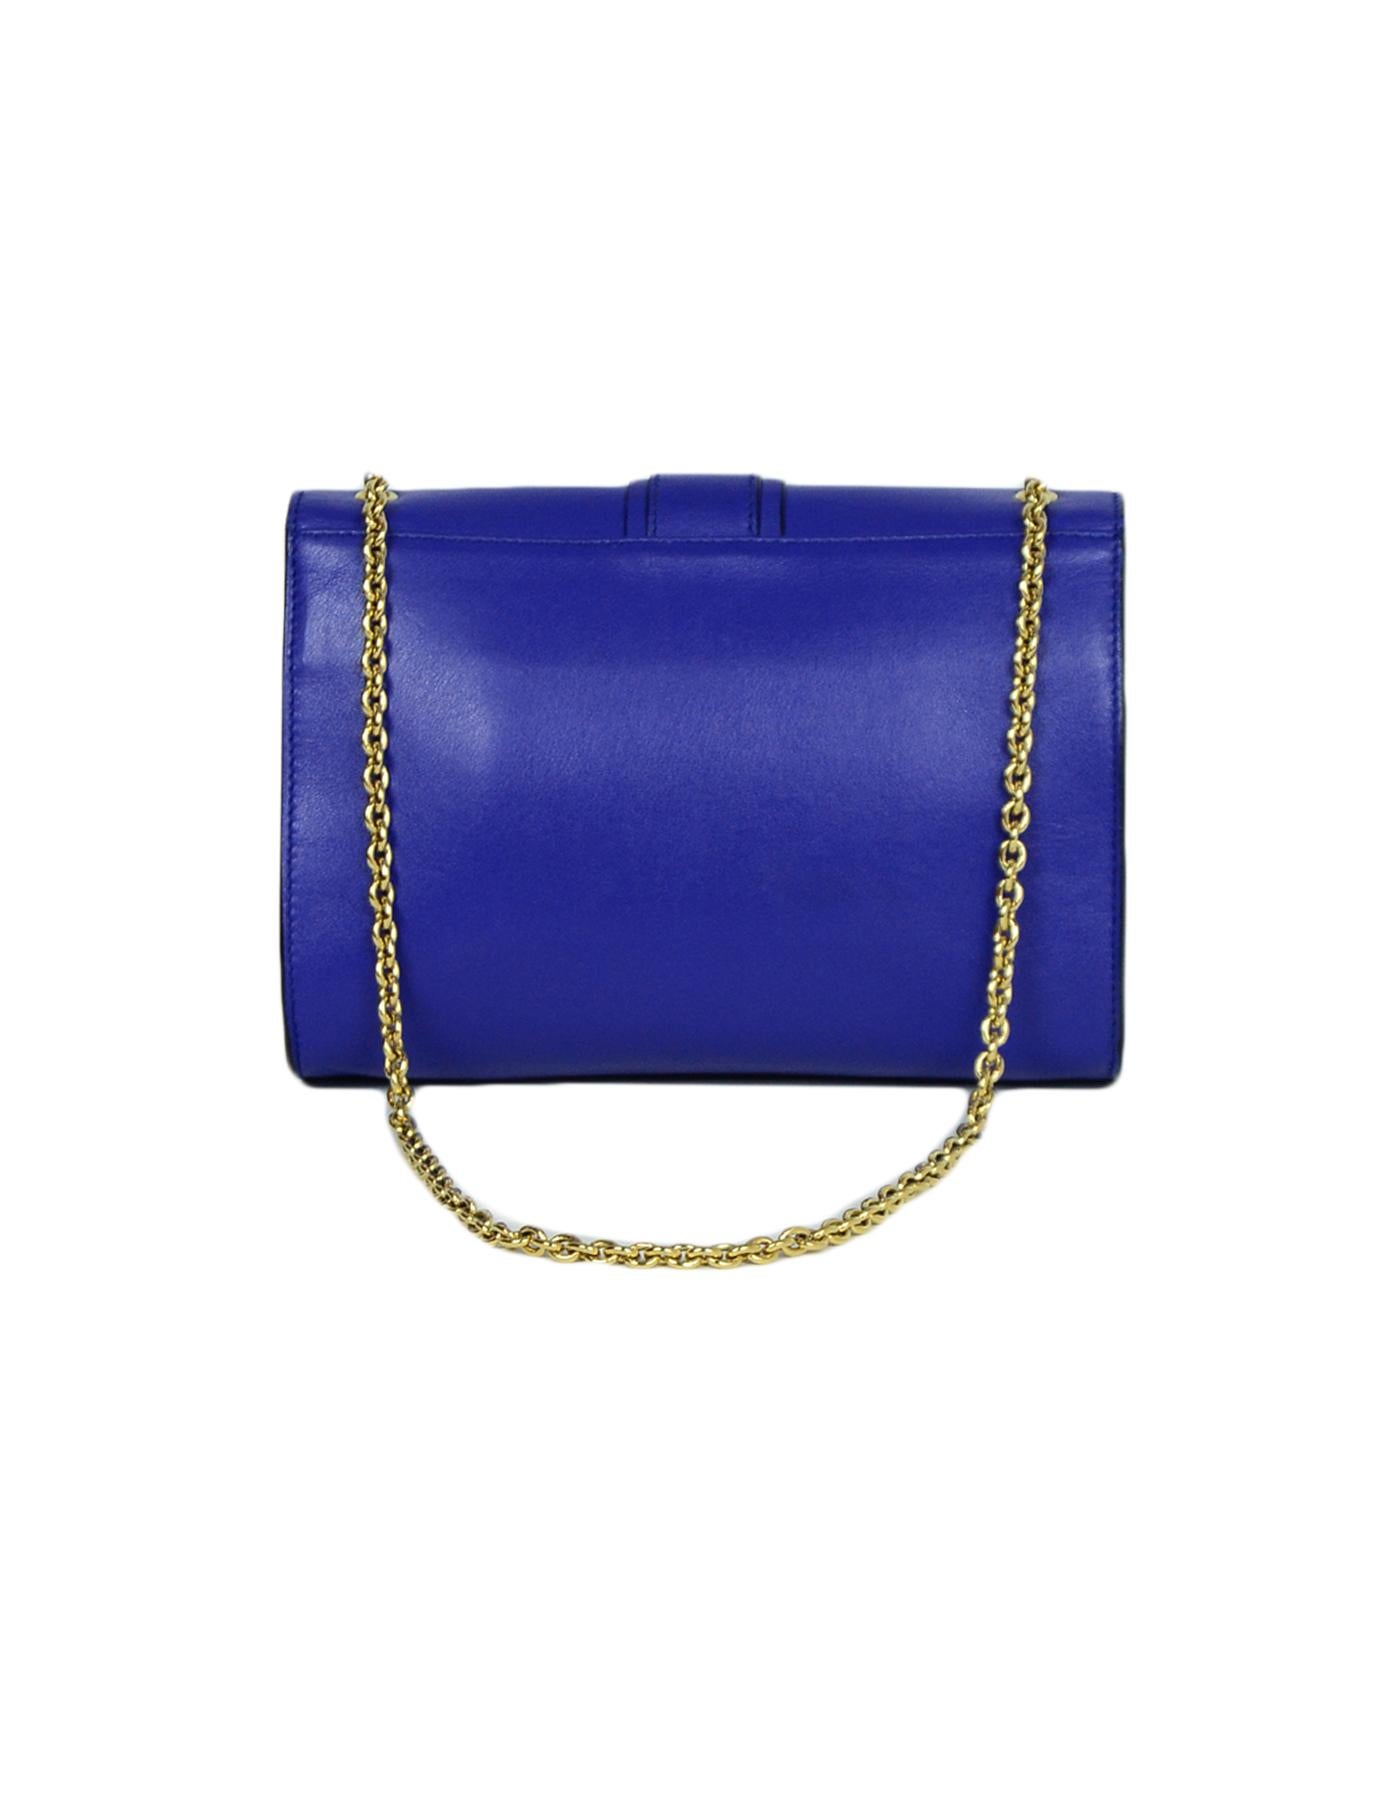 Salvatore Ferragamo Royal Blue Leather Gancini Flap Bag w/ Chain Strap In Excellent Condition In New York, NY